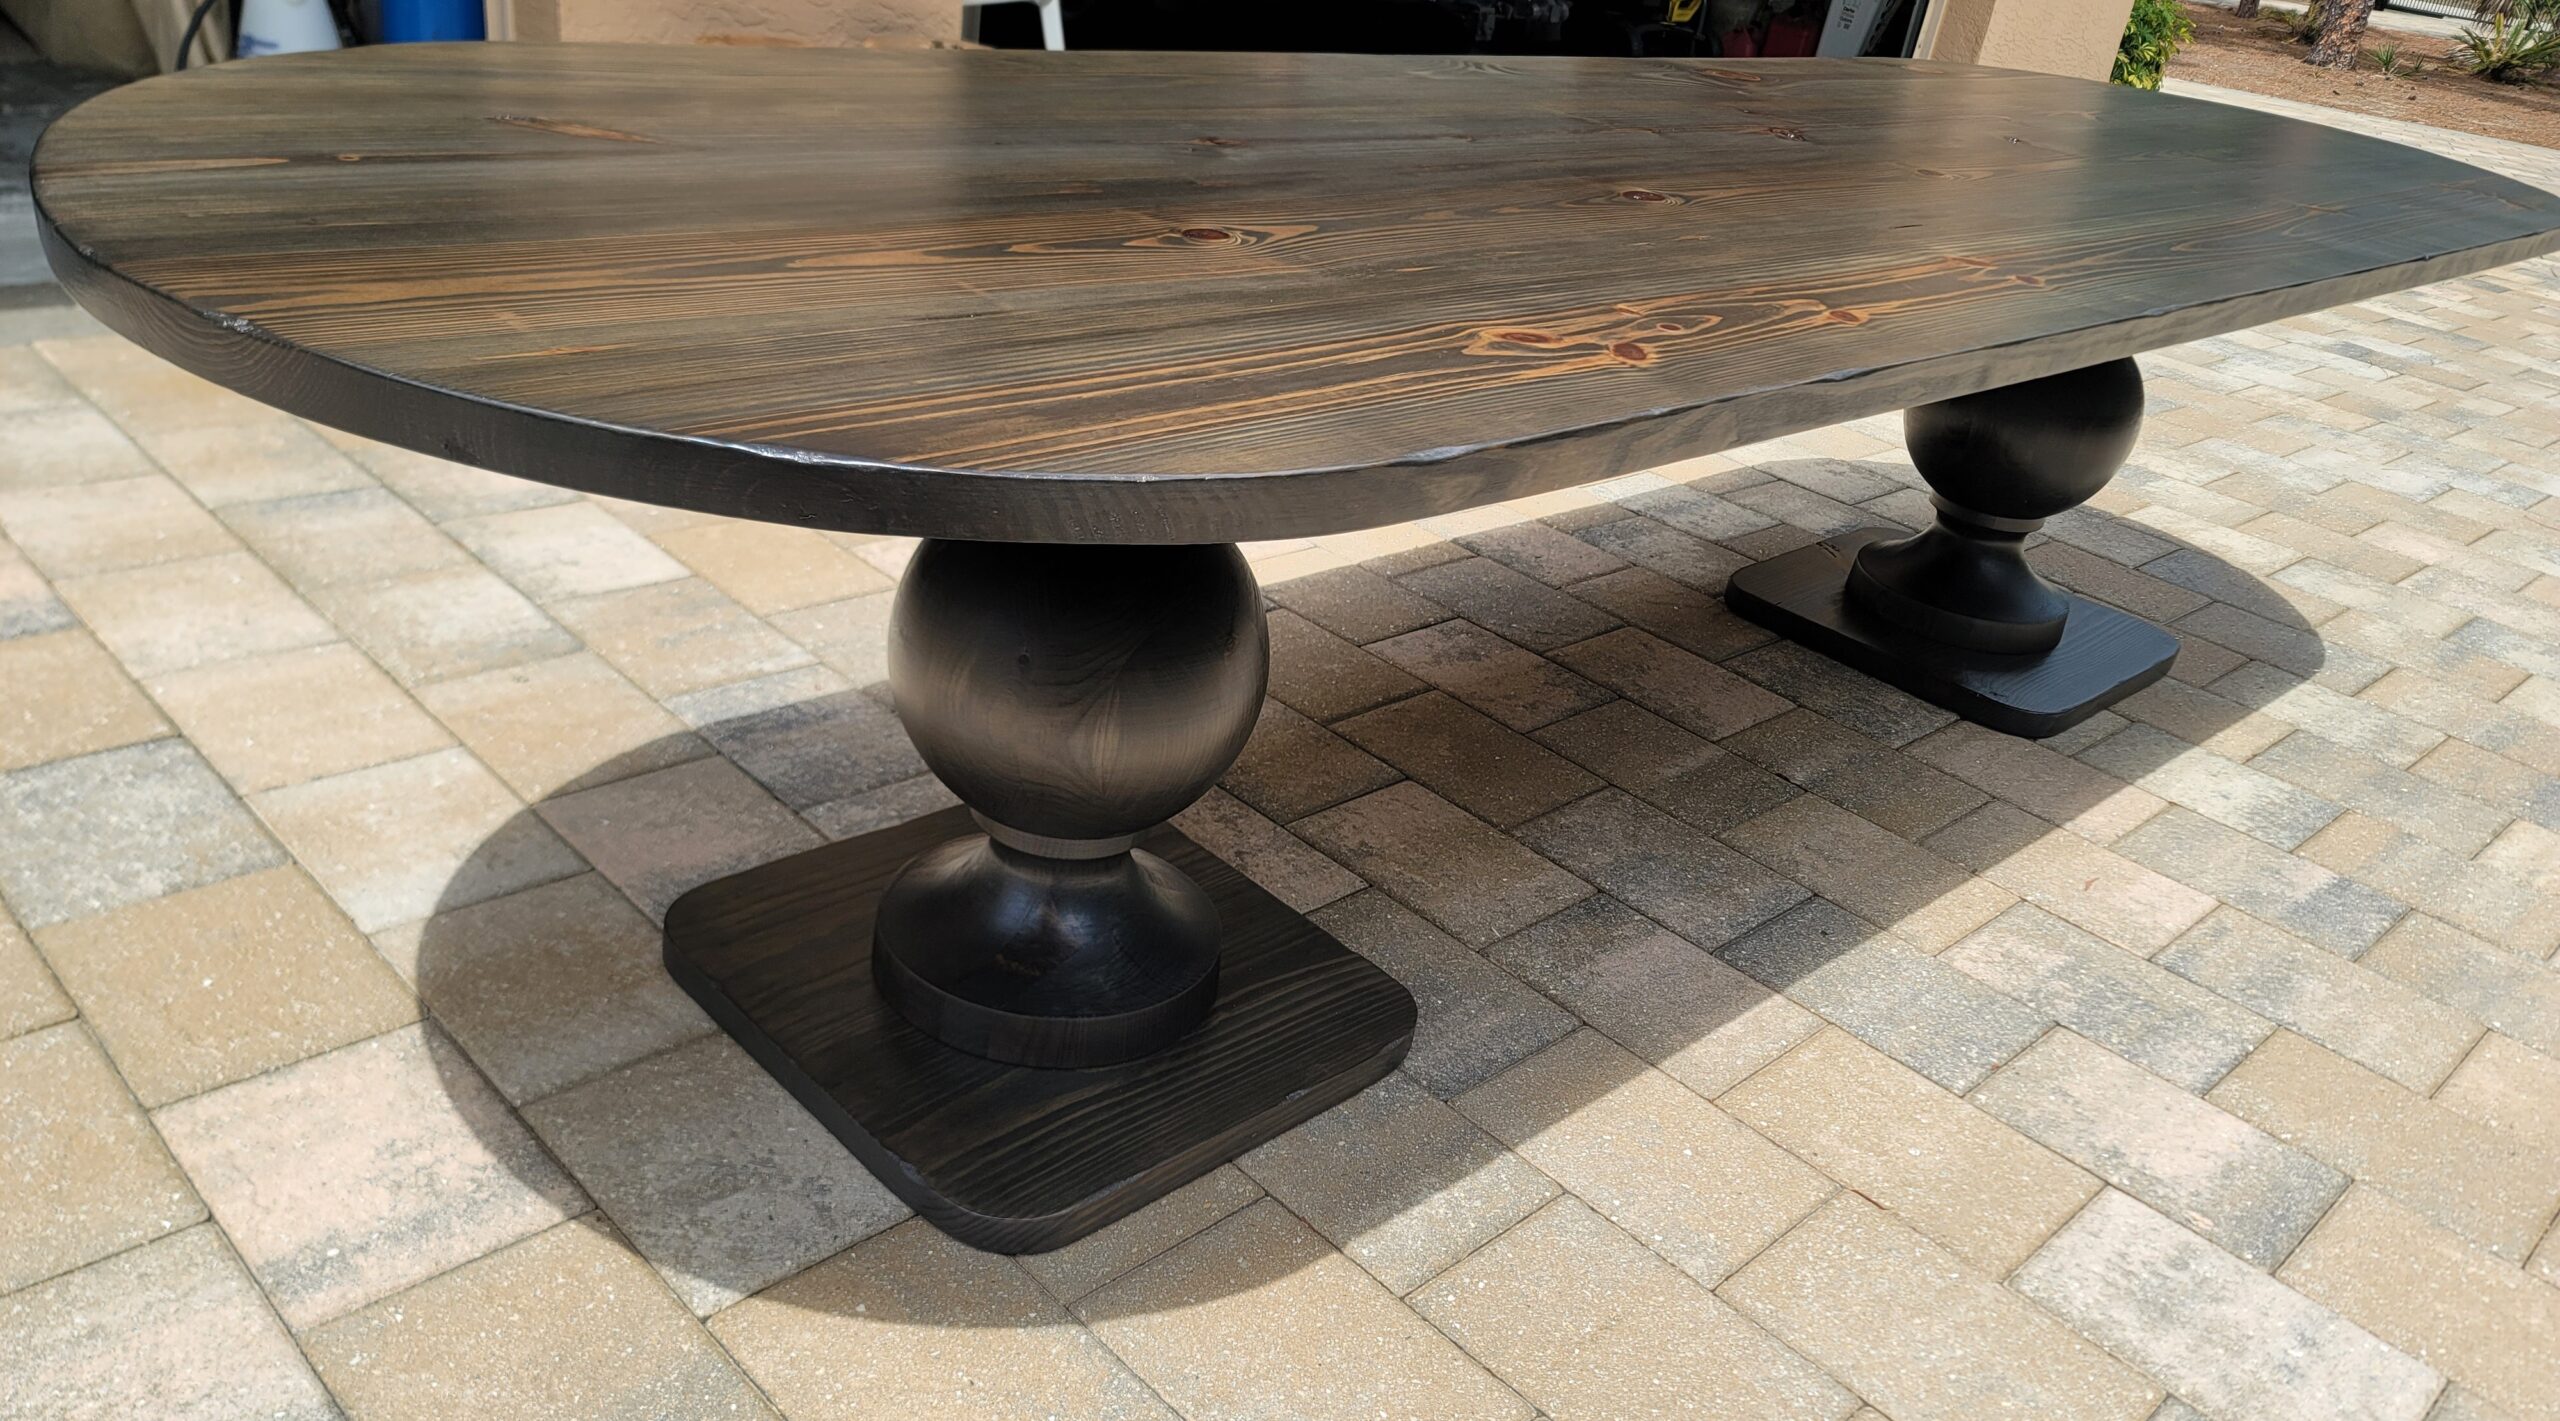 Oval ball pedestal trestle table in onyx